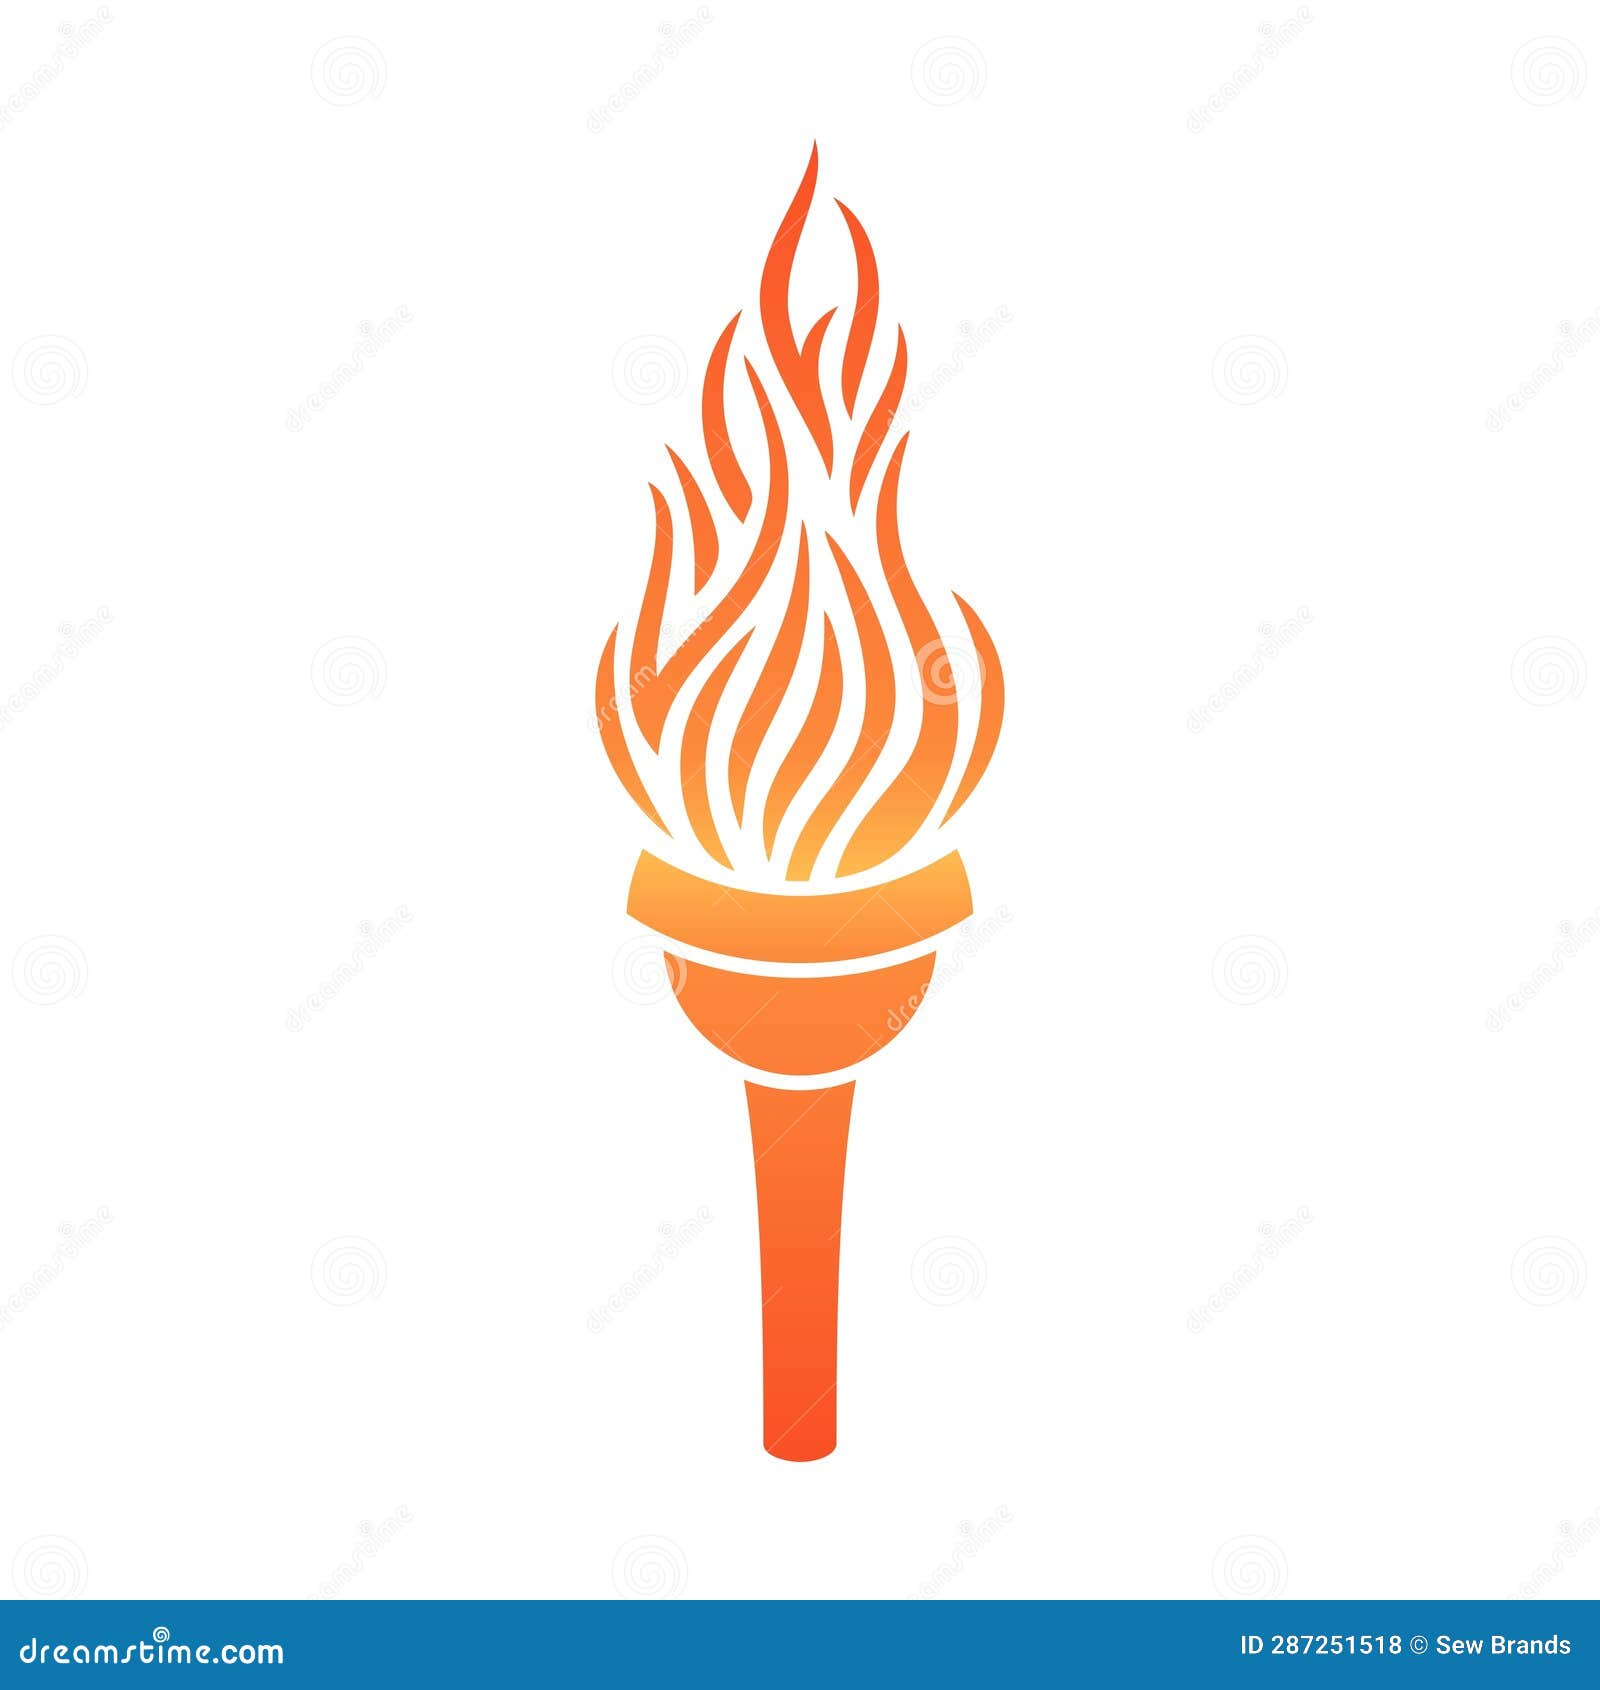 Torch Fire Clip Art of Flame Icon Stock Vector - Illustration of